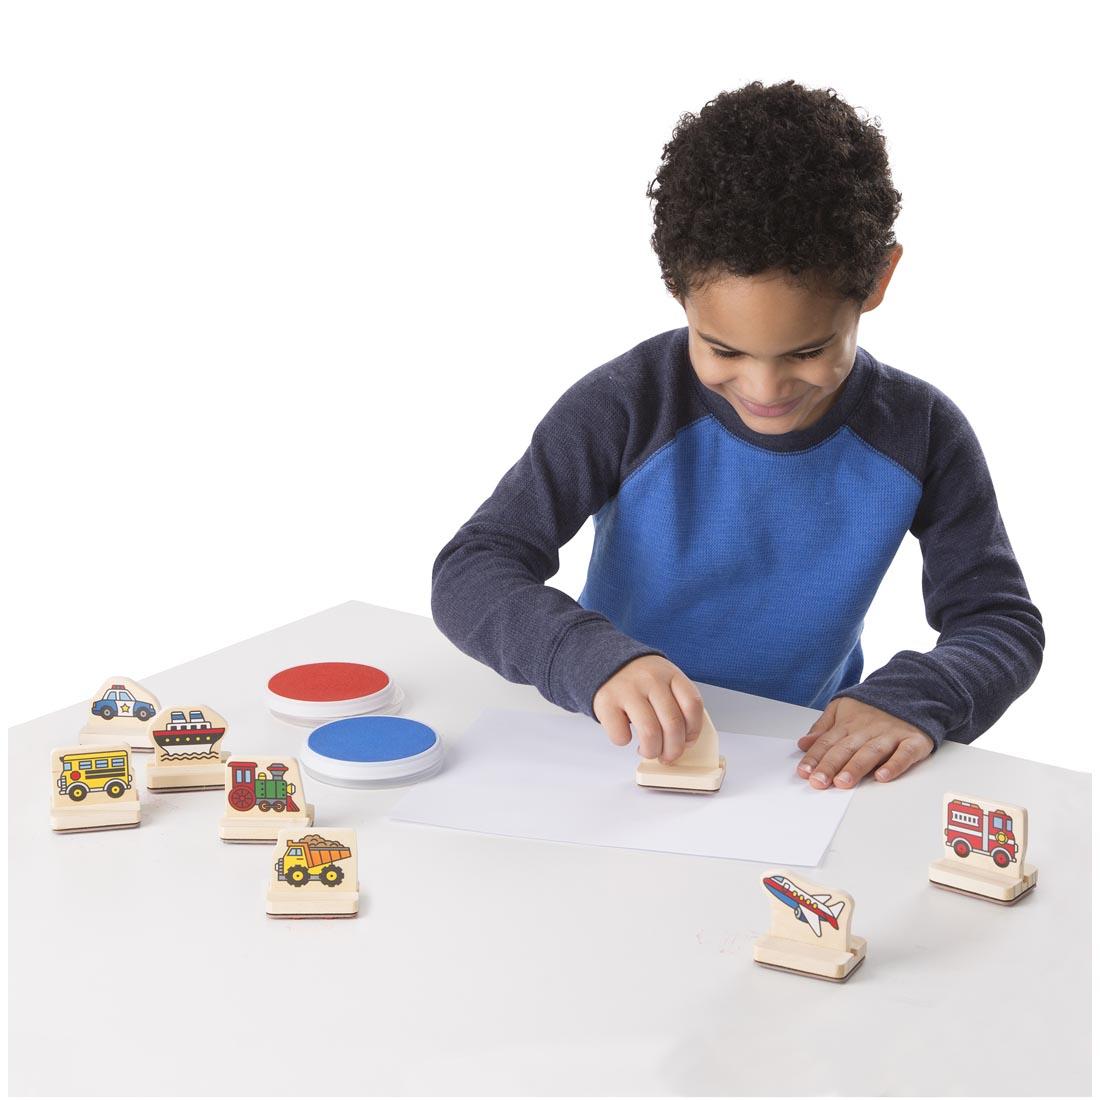 Child using the Melissa & Doug Vehicles My First Wooden Stamp Set